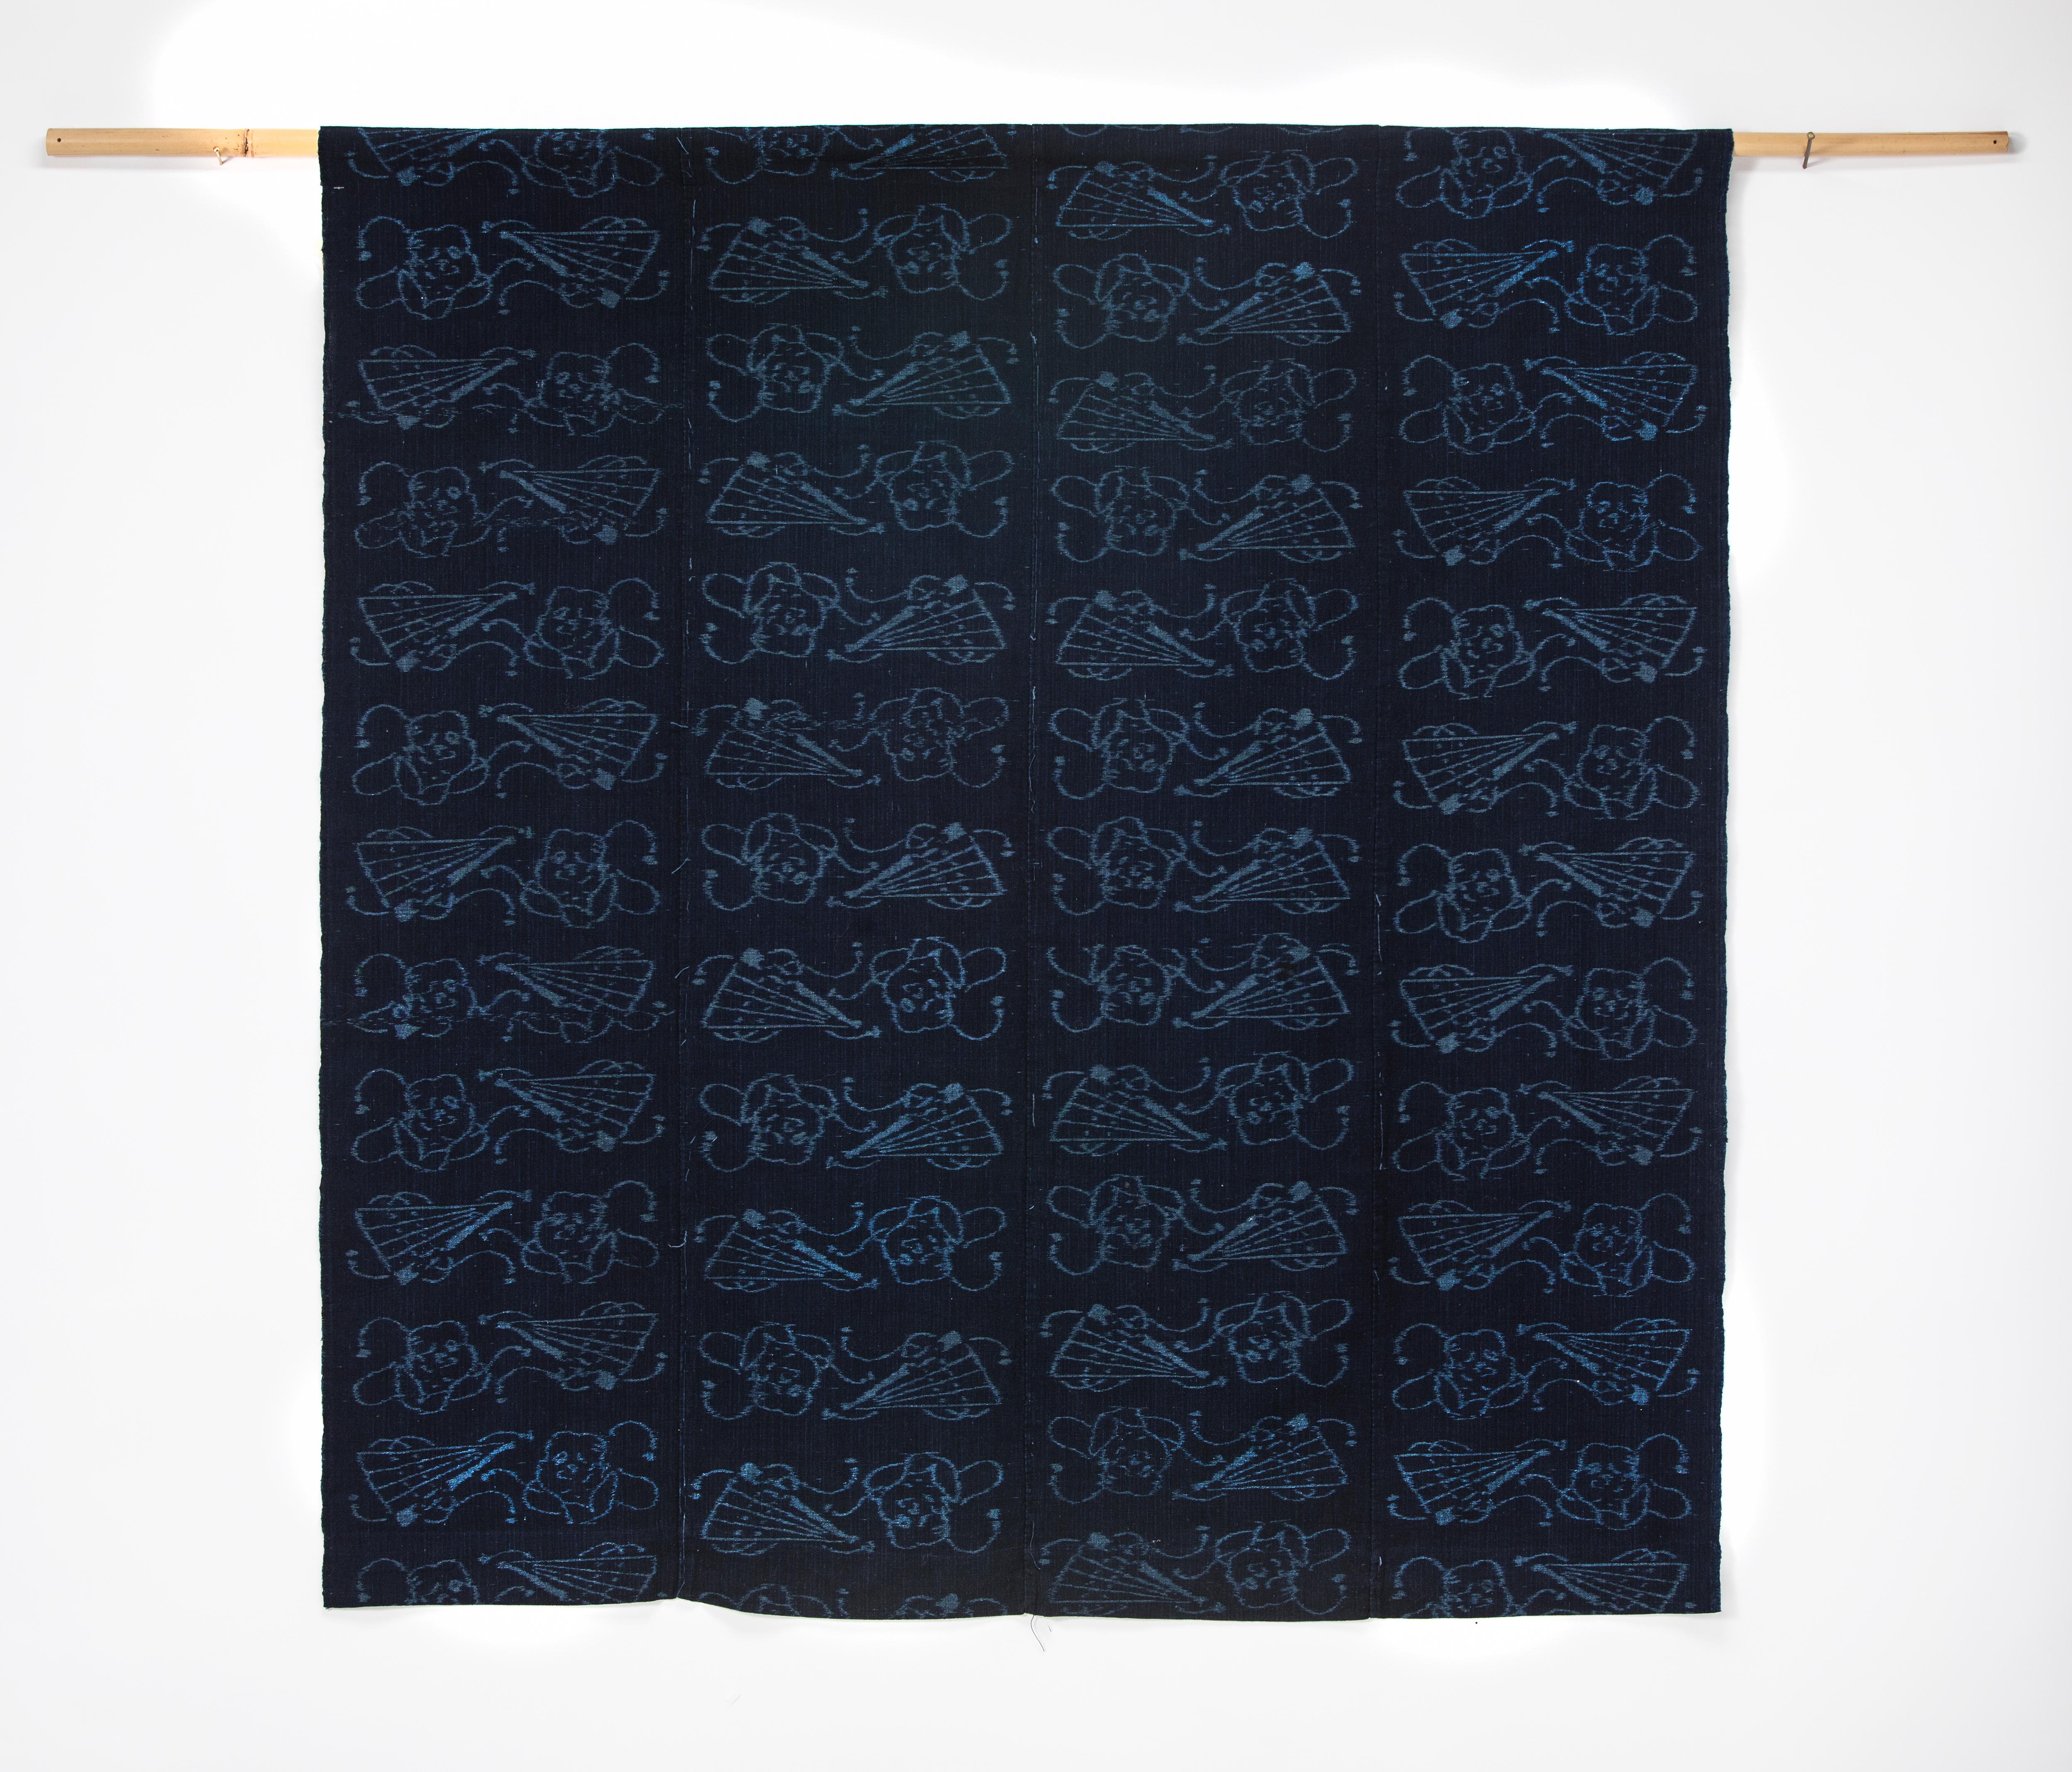 Antique Otafuku IKAT Textile of Masks and Fans

Antique IKAT 4 Panel Futon Cover of Otafuku Masks and Fans.
Hand stitched together. Hand Woven Indigo Dyed Cotton.

This 4 Panel Futon Cover features Otafuku Masks and Fans.
She is a Mythical